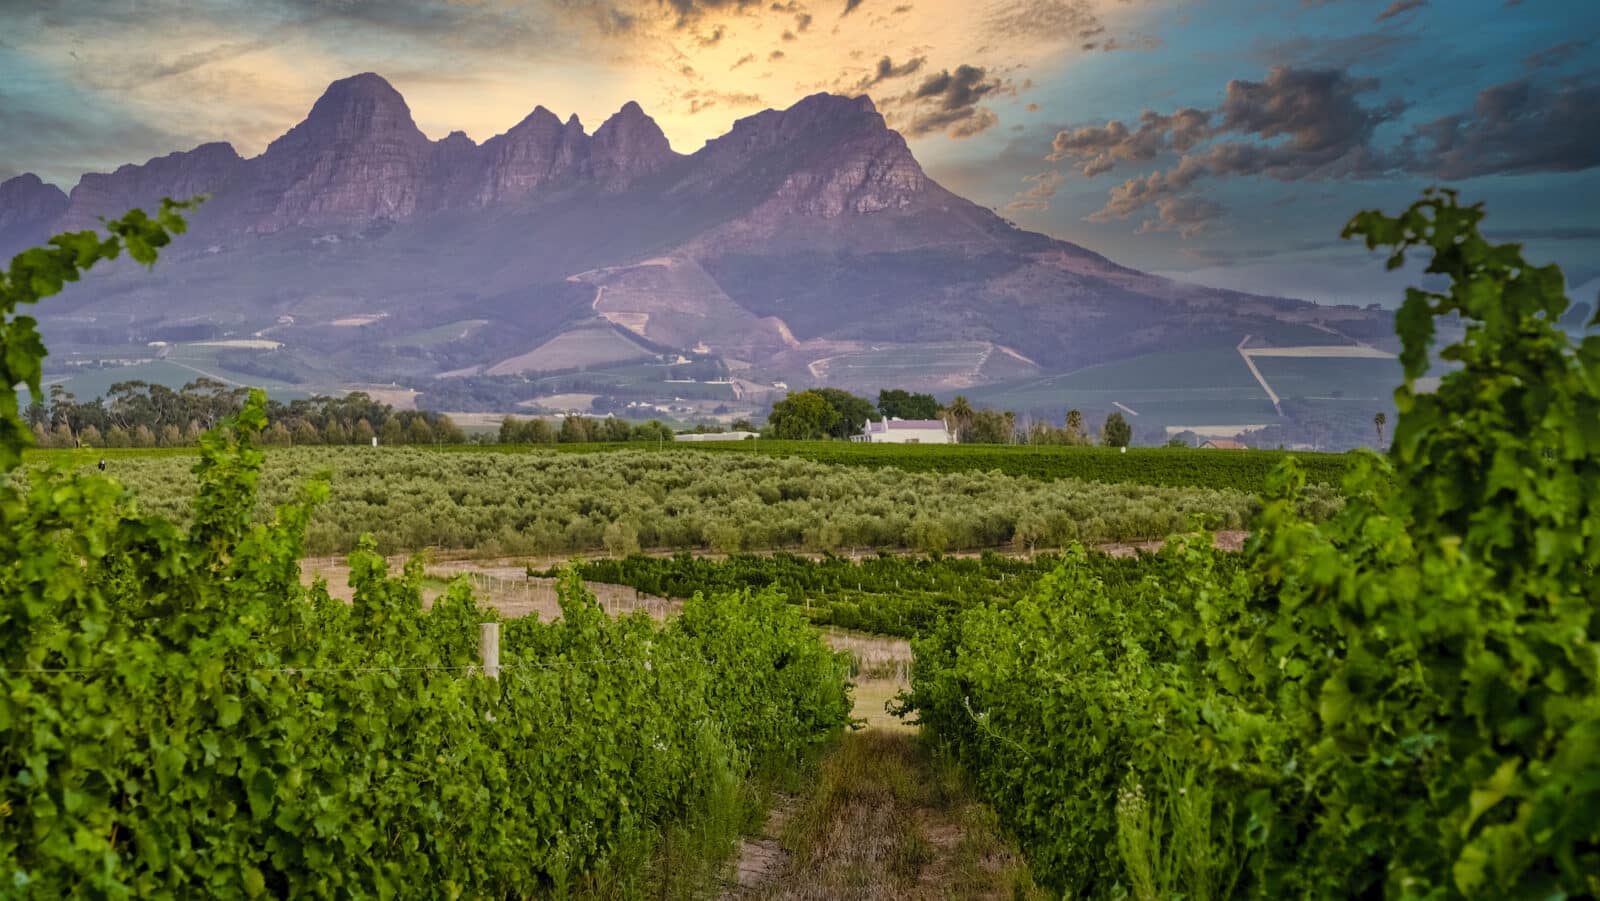 Vineyard landscape at sunset with mountains in Stellenbosch, near Cape Town, South Africa. wine grapes on vine in vineyard,